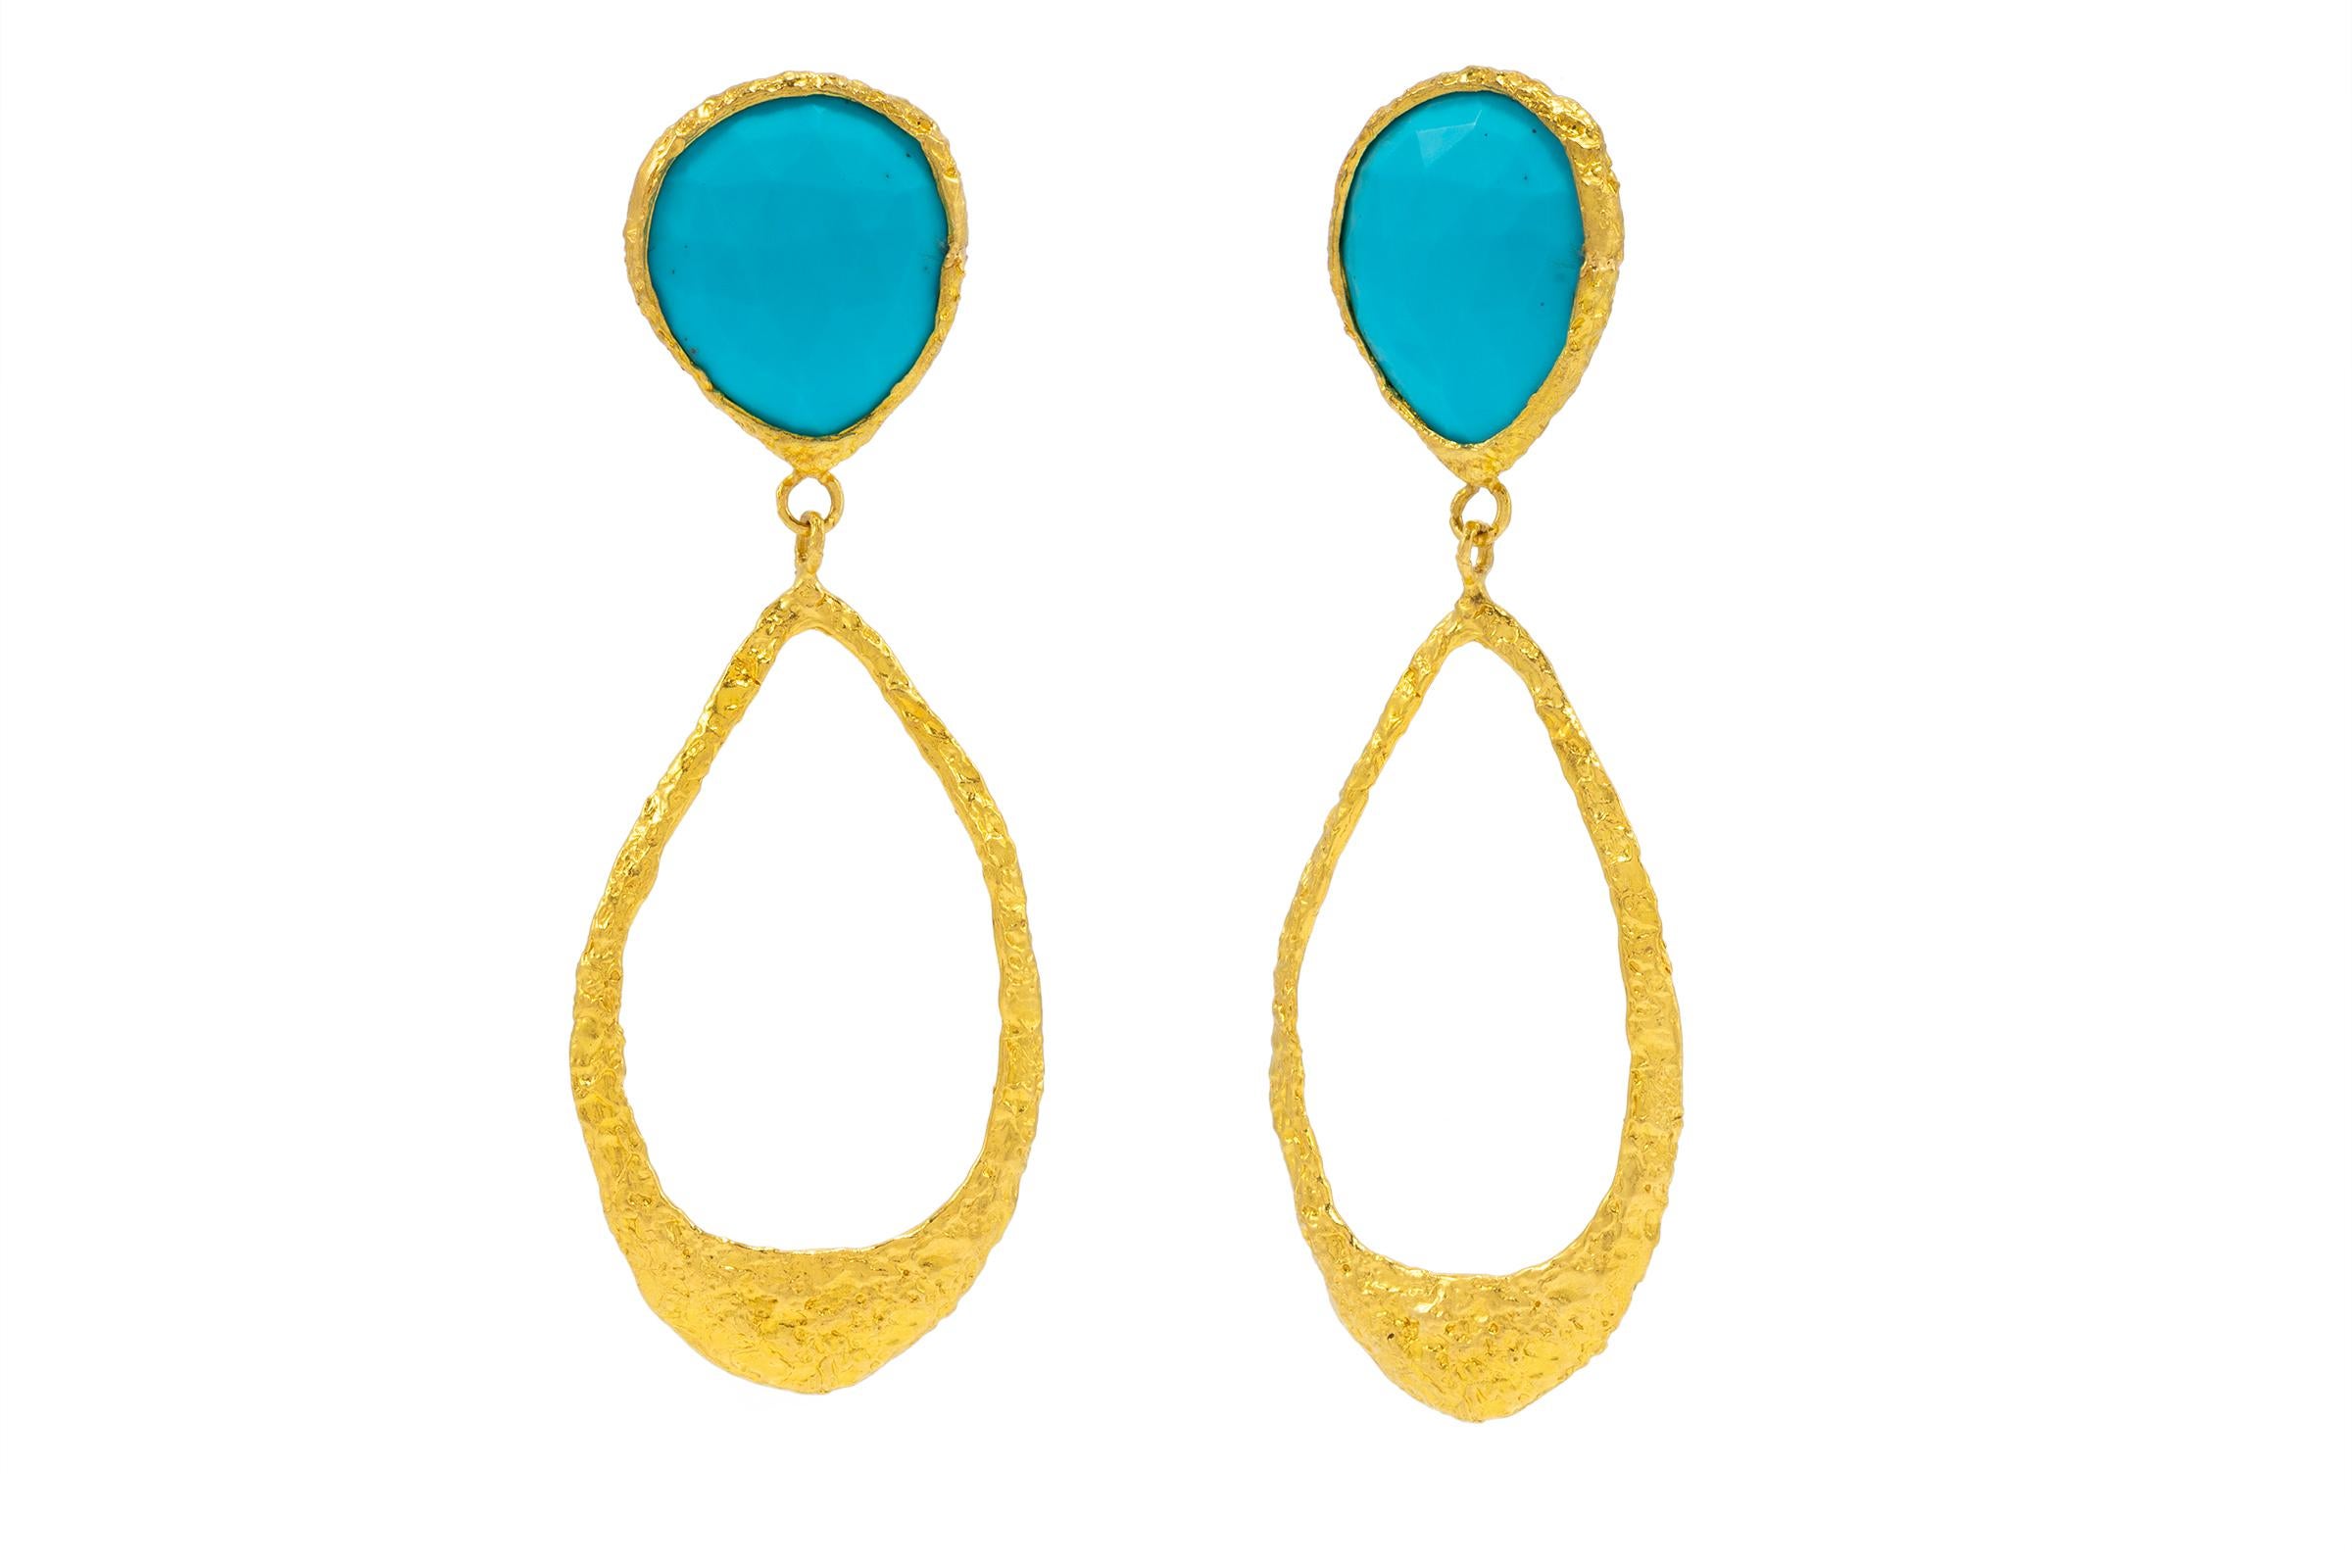 Artisan Tagili Signature Teardrop Earrings with Turquoise in 22k Gold For Sale